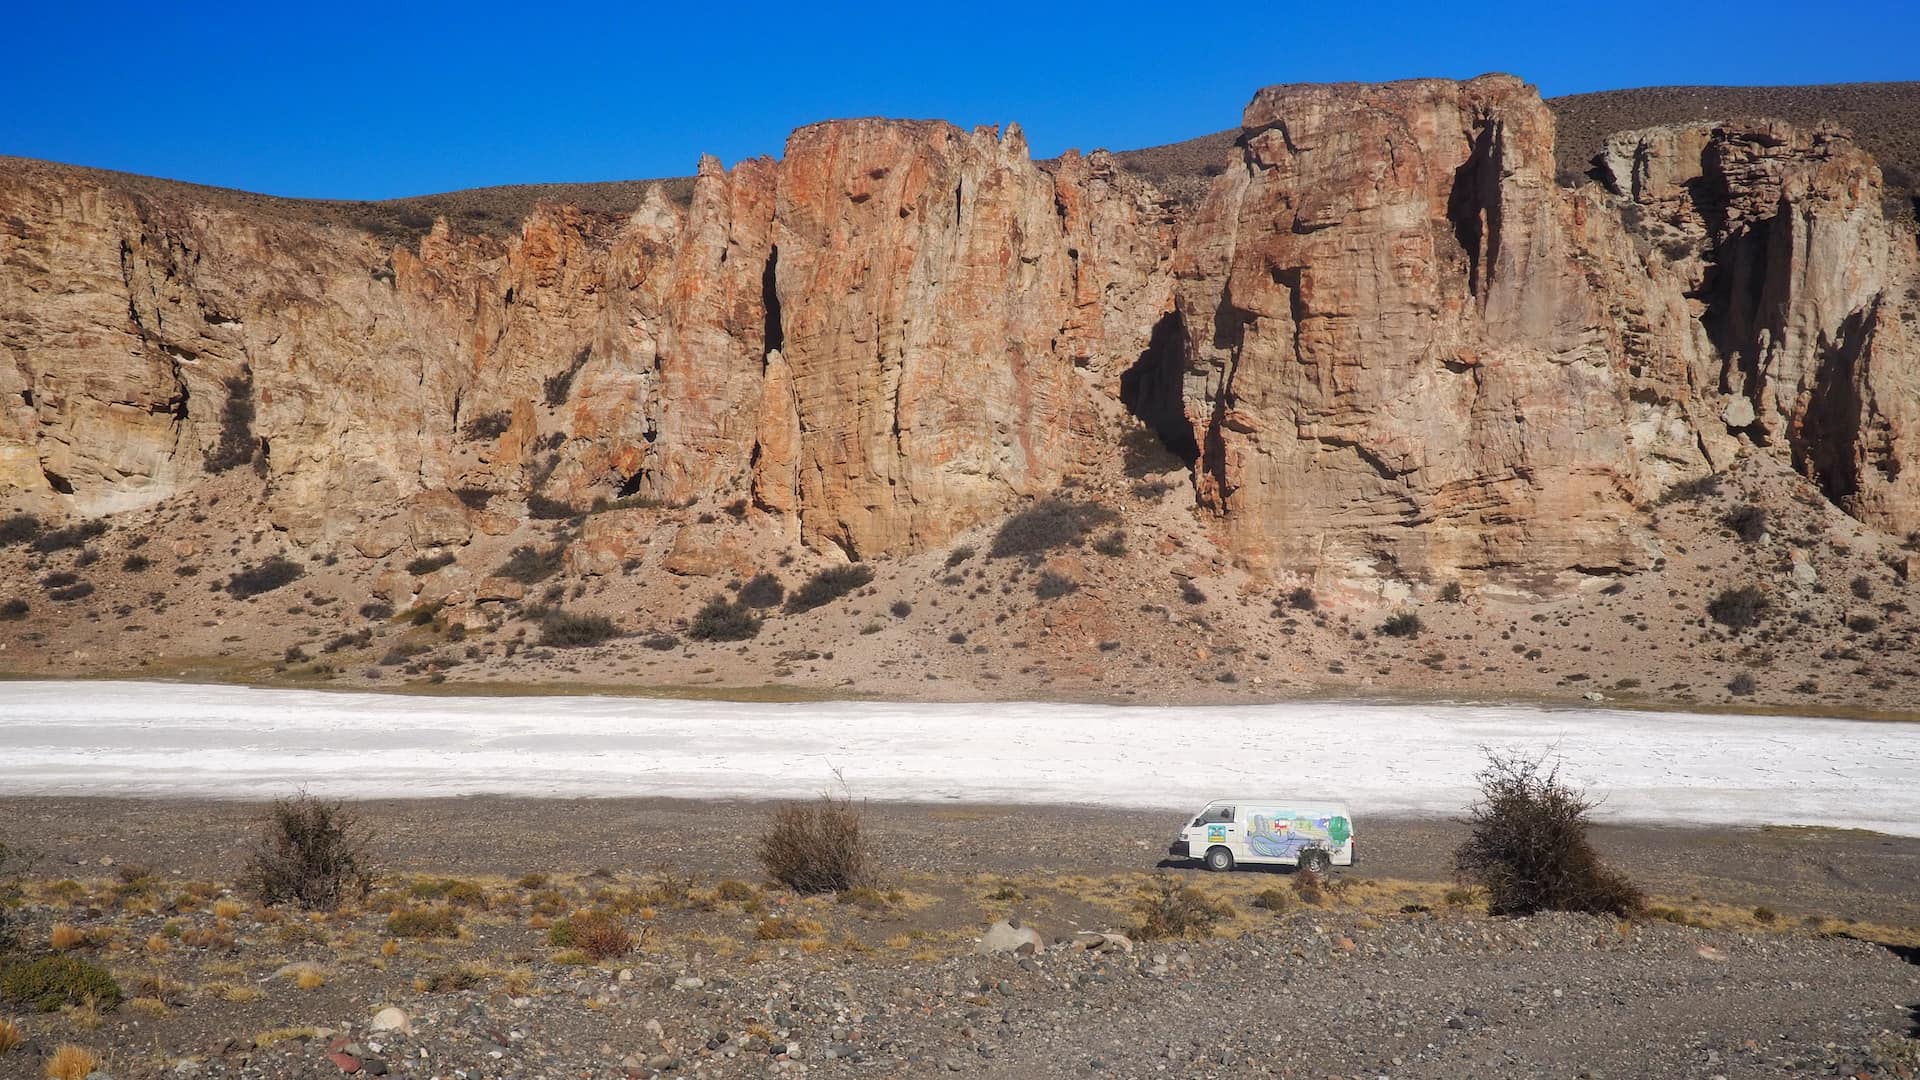 Camper van parked at the bottom of a canyon